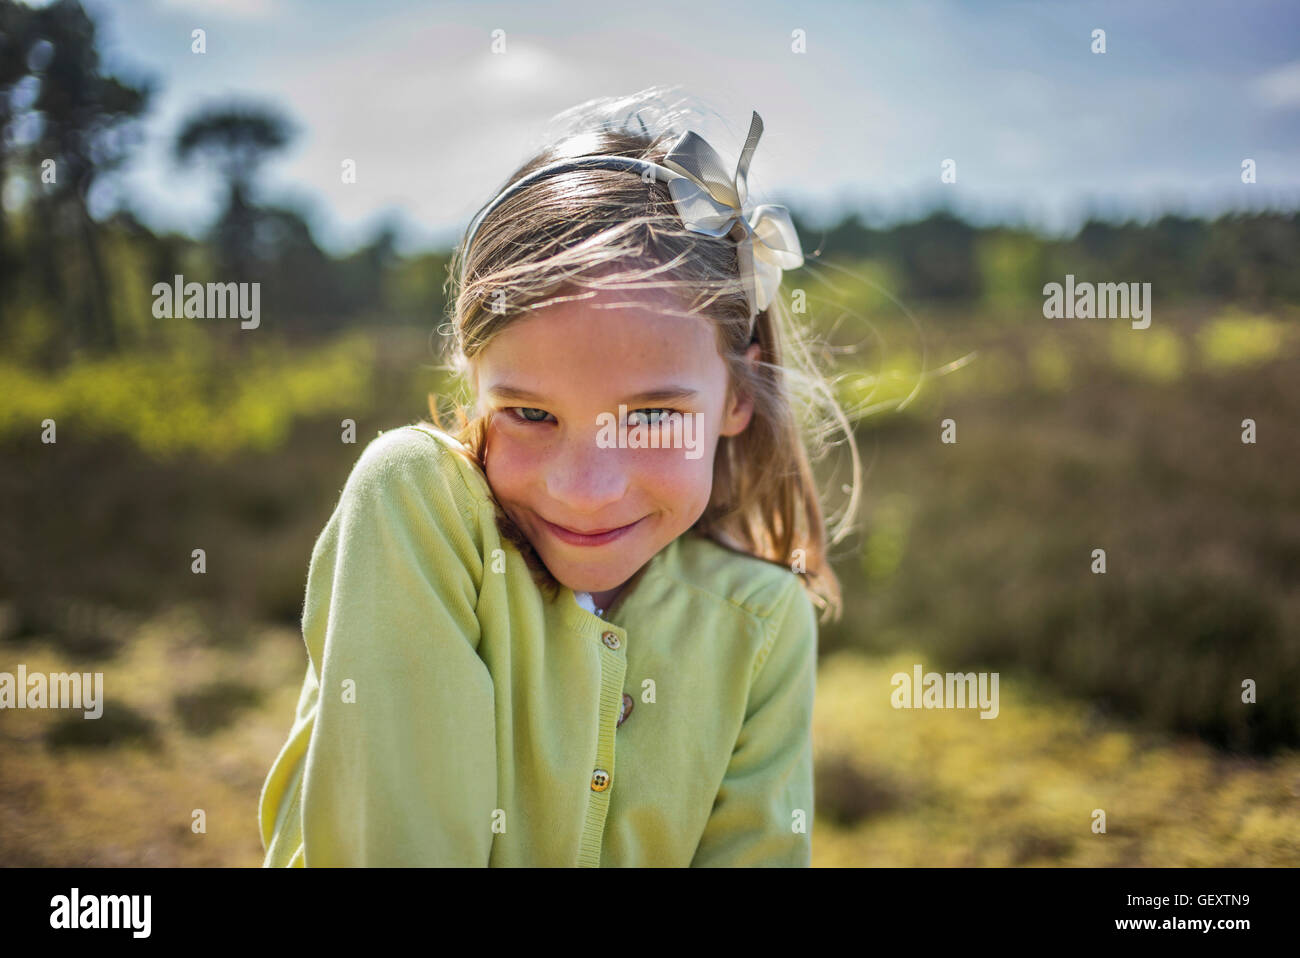 A young girl smiles cheekily at the camera. Stock Photo